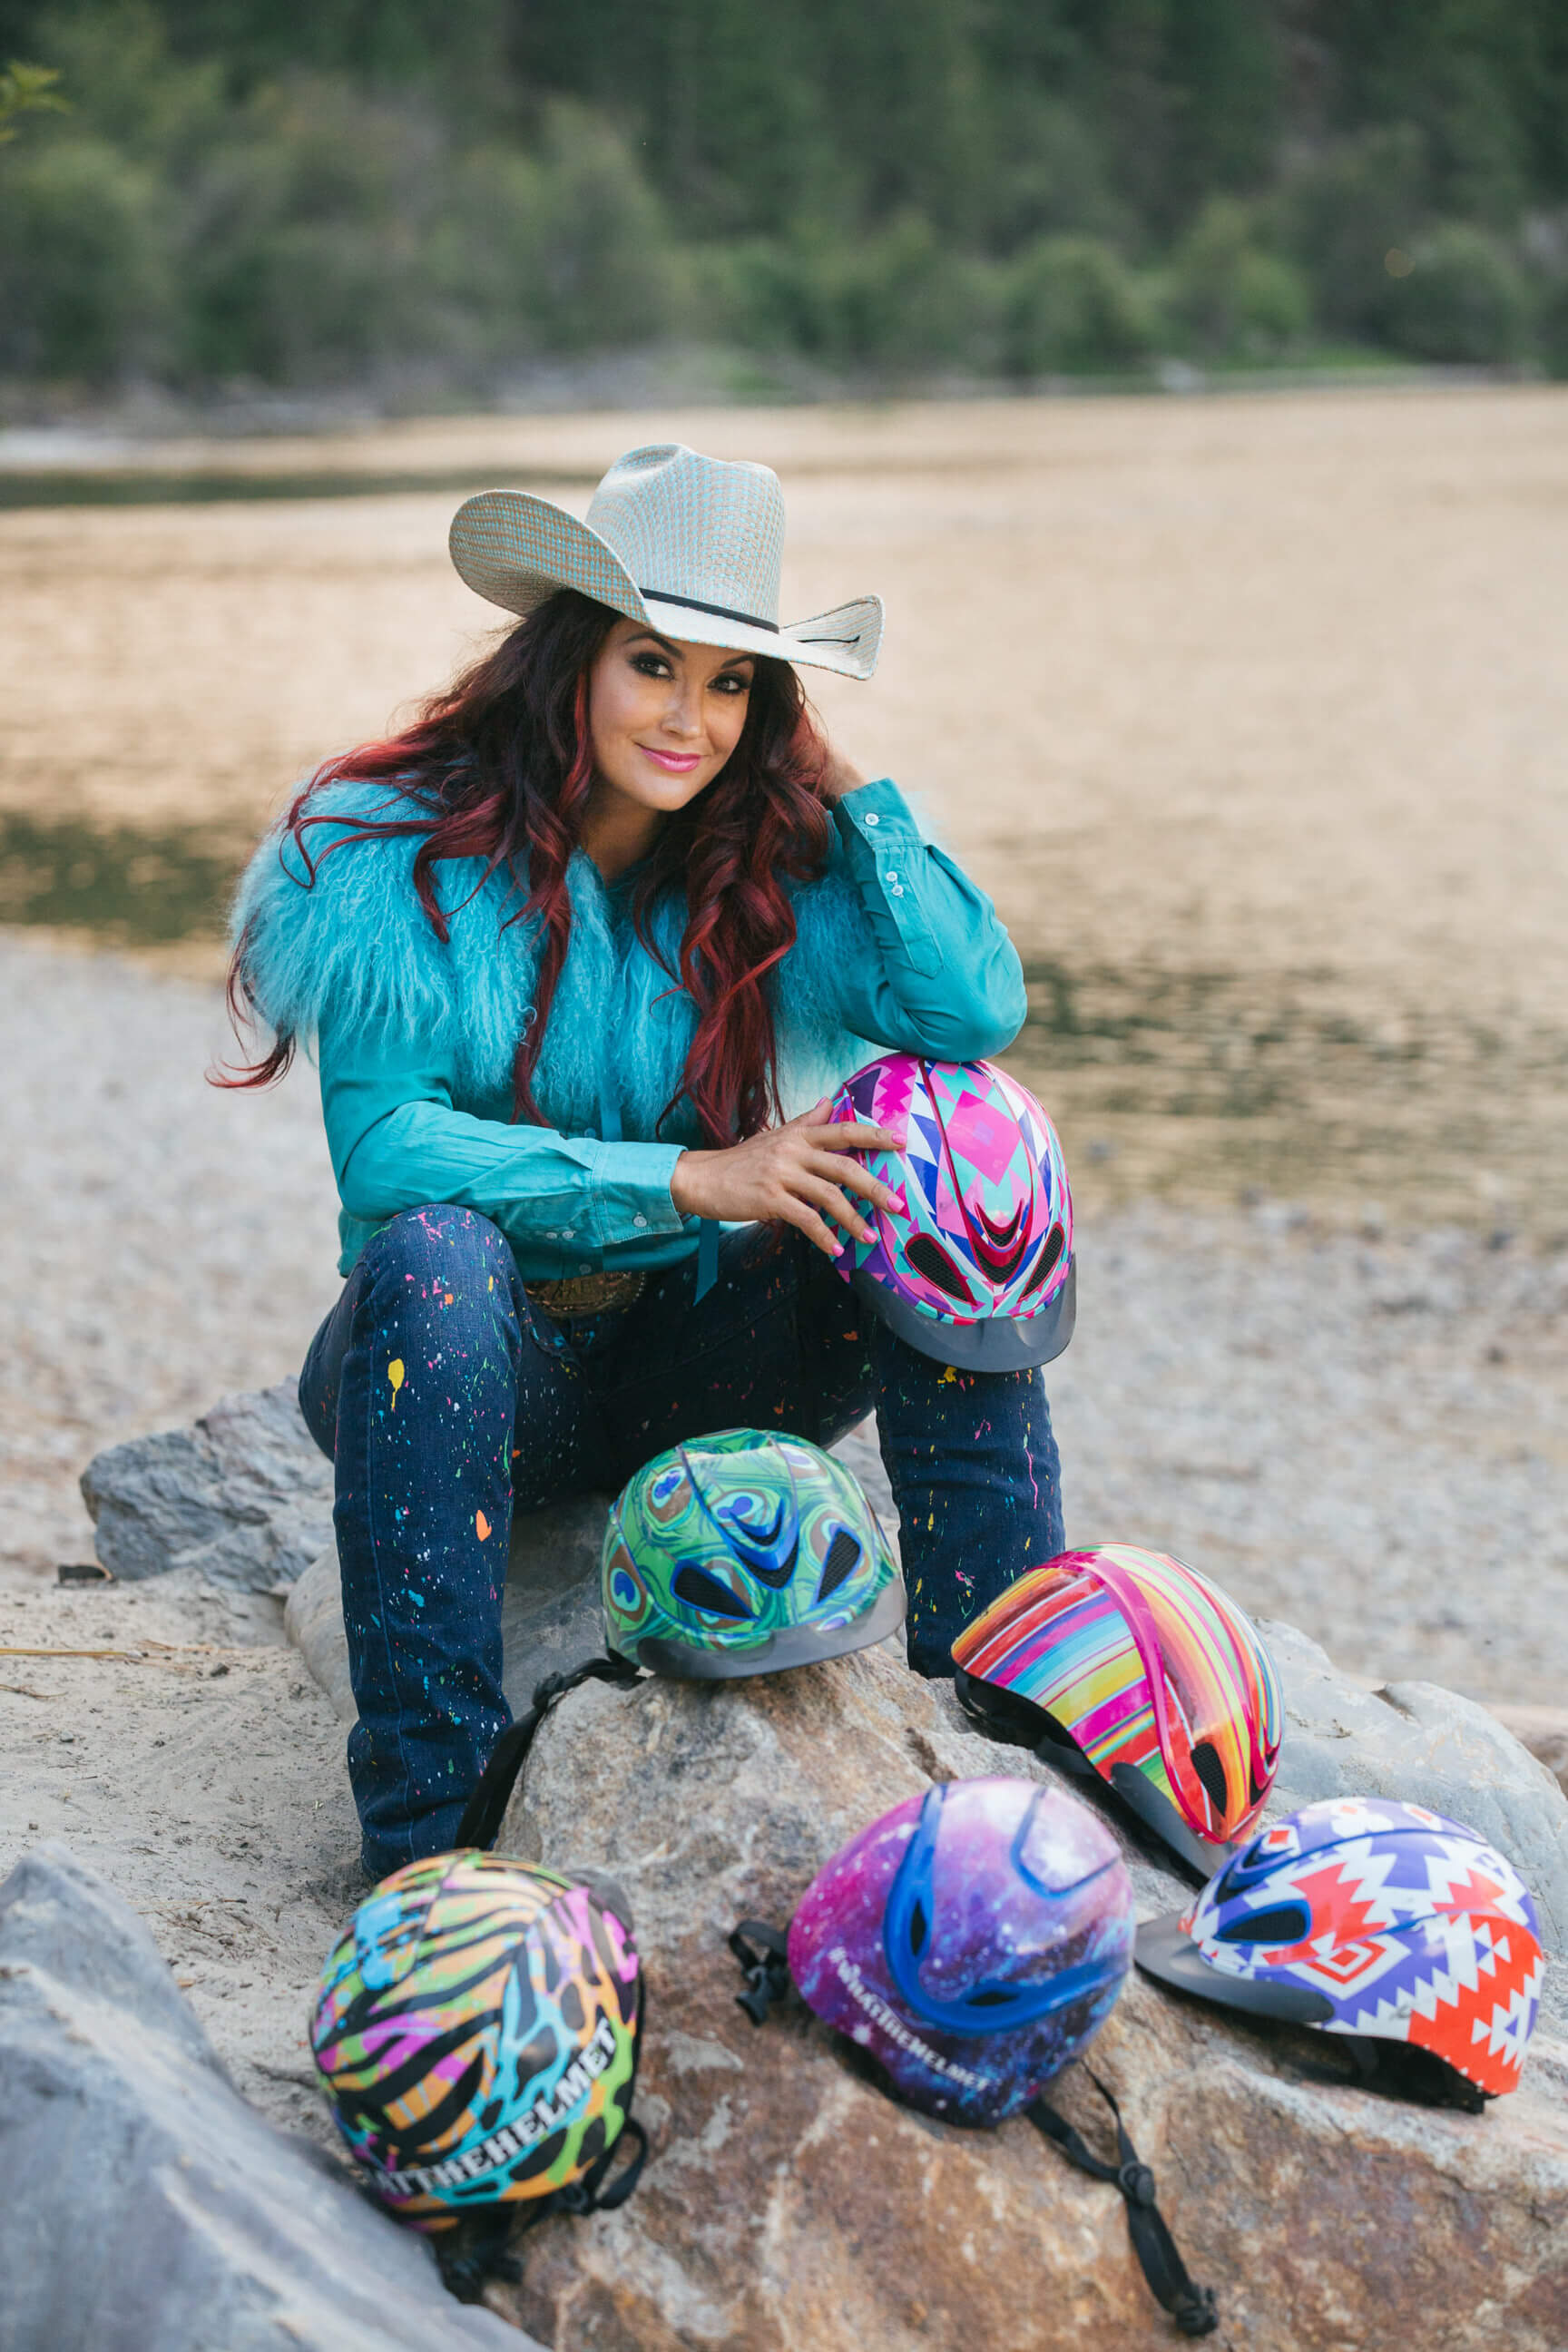 Fallon Taylor poses with her wide variety of helmets that she wears while competing in barrel racing